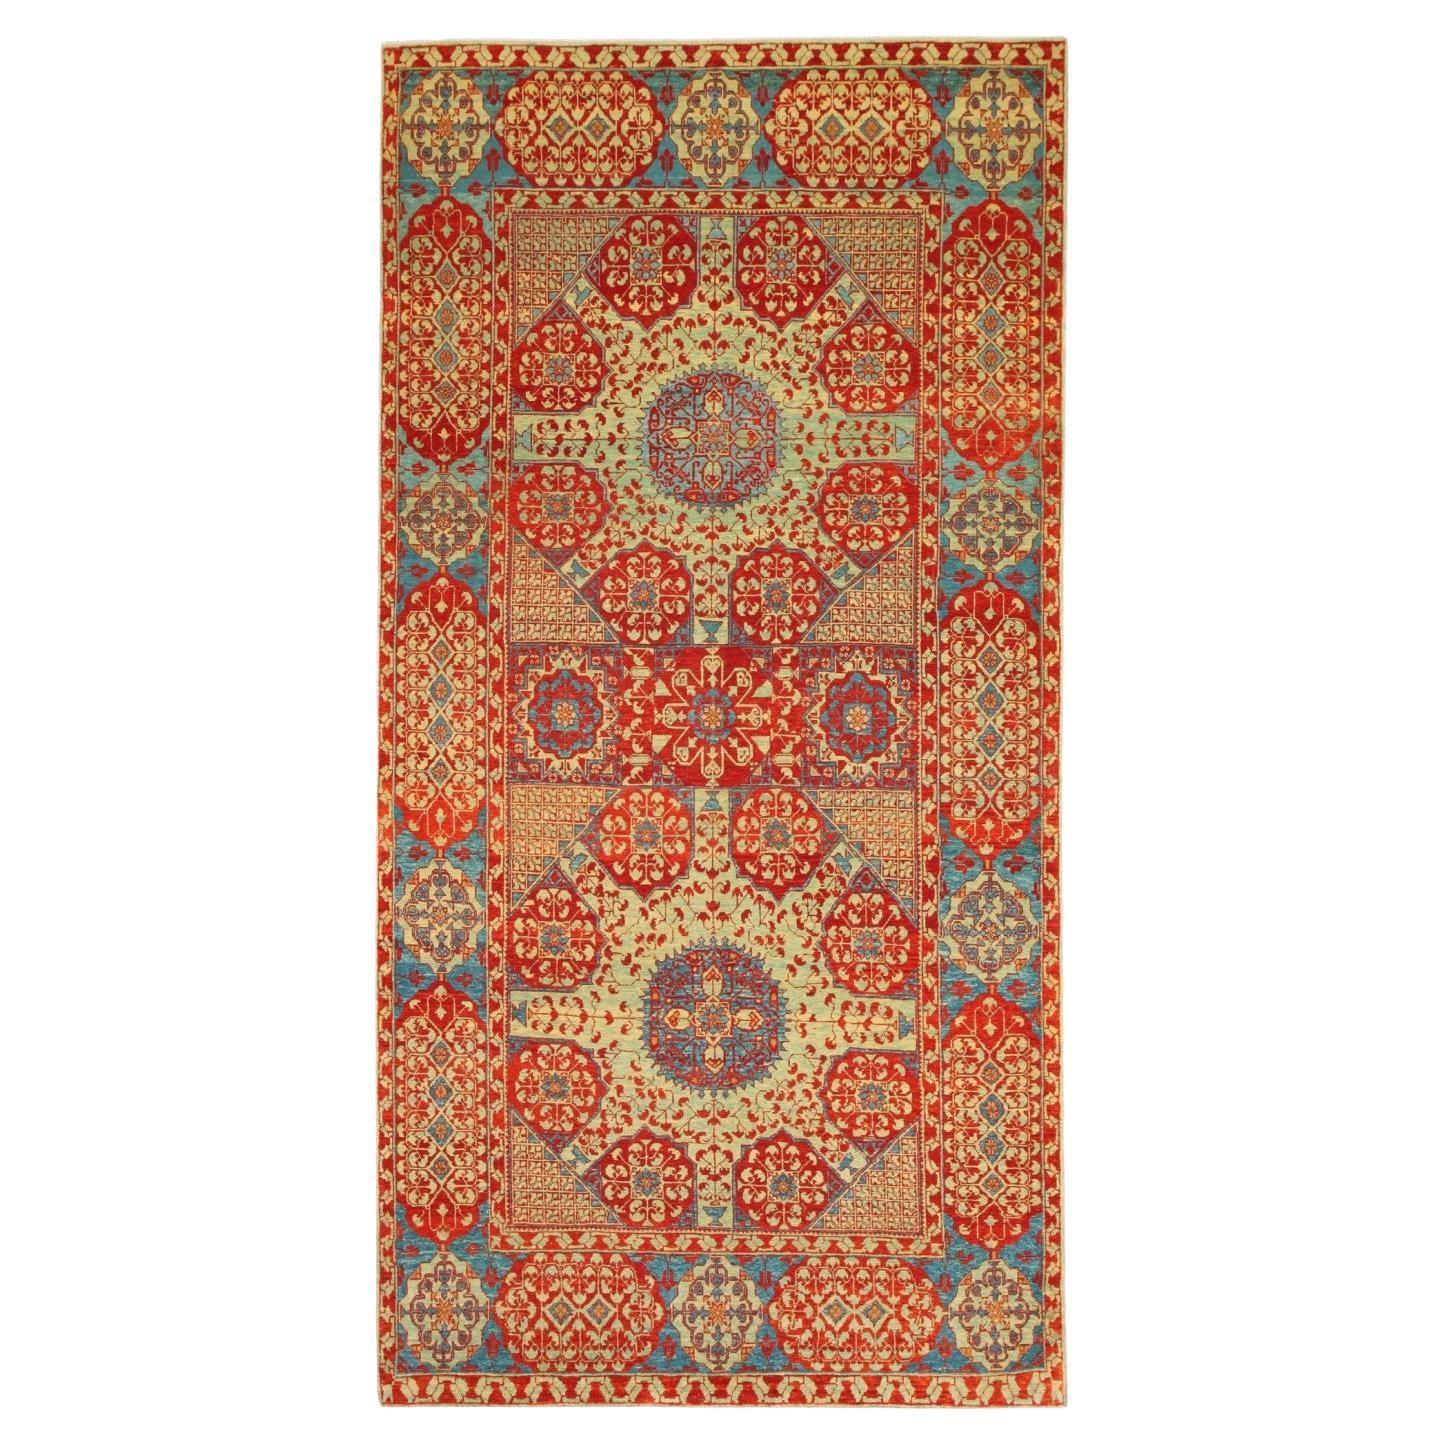 Ararat Rugs Mamluk Carpet with Cup Motif, Antique Revival Rug, Natural Dyed